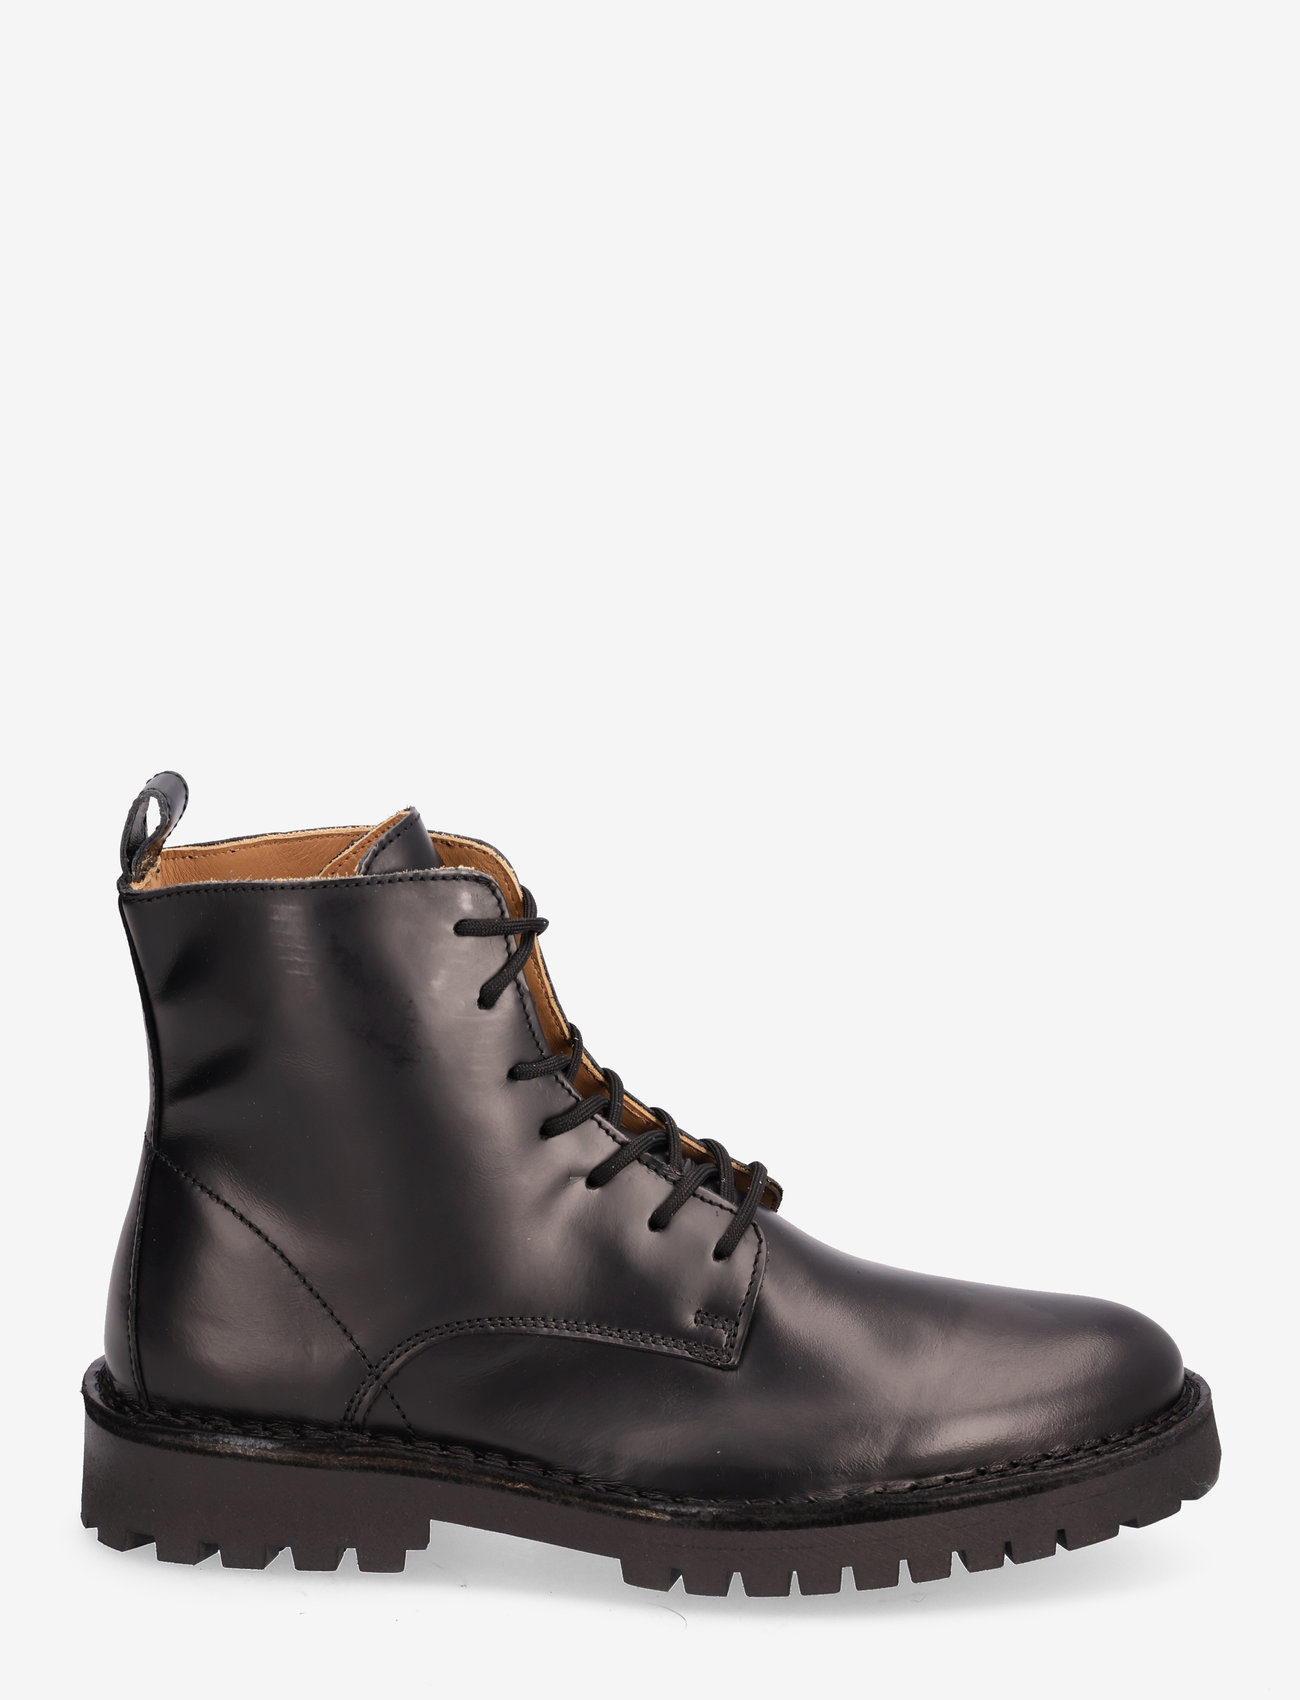 Selected Homme - SLHRICKY LEATHER LACE-UP BOOT - med snøring - black - 1